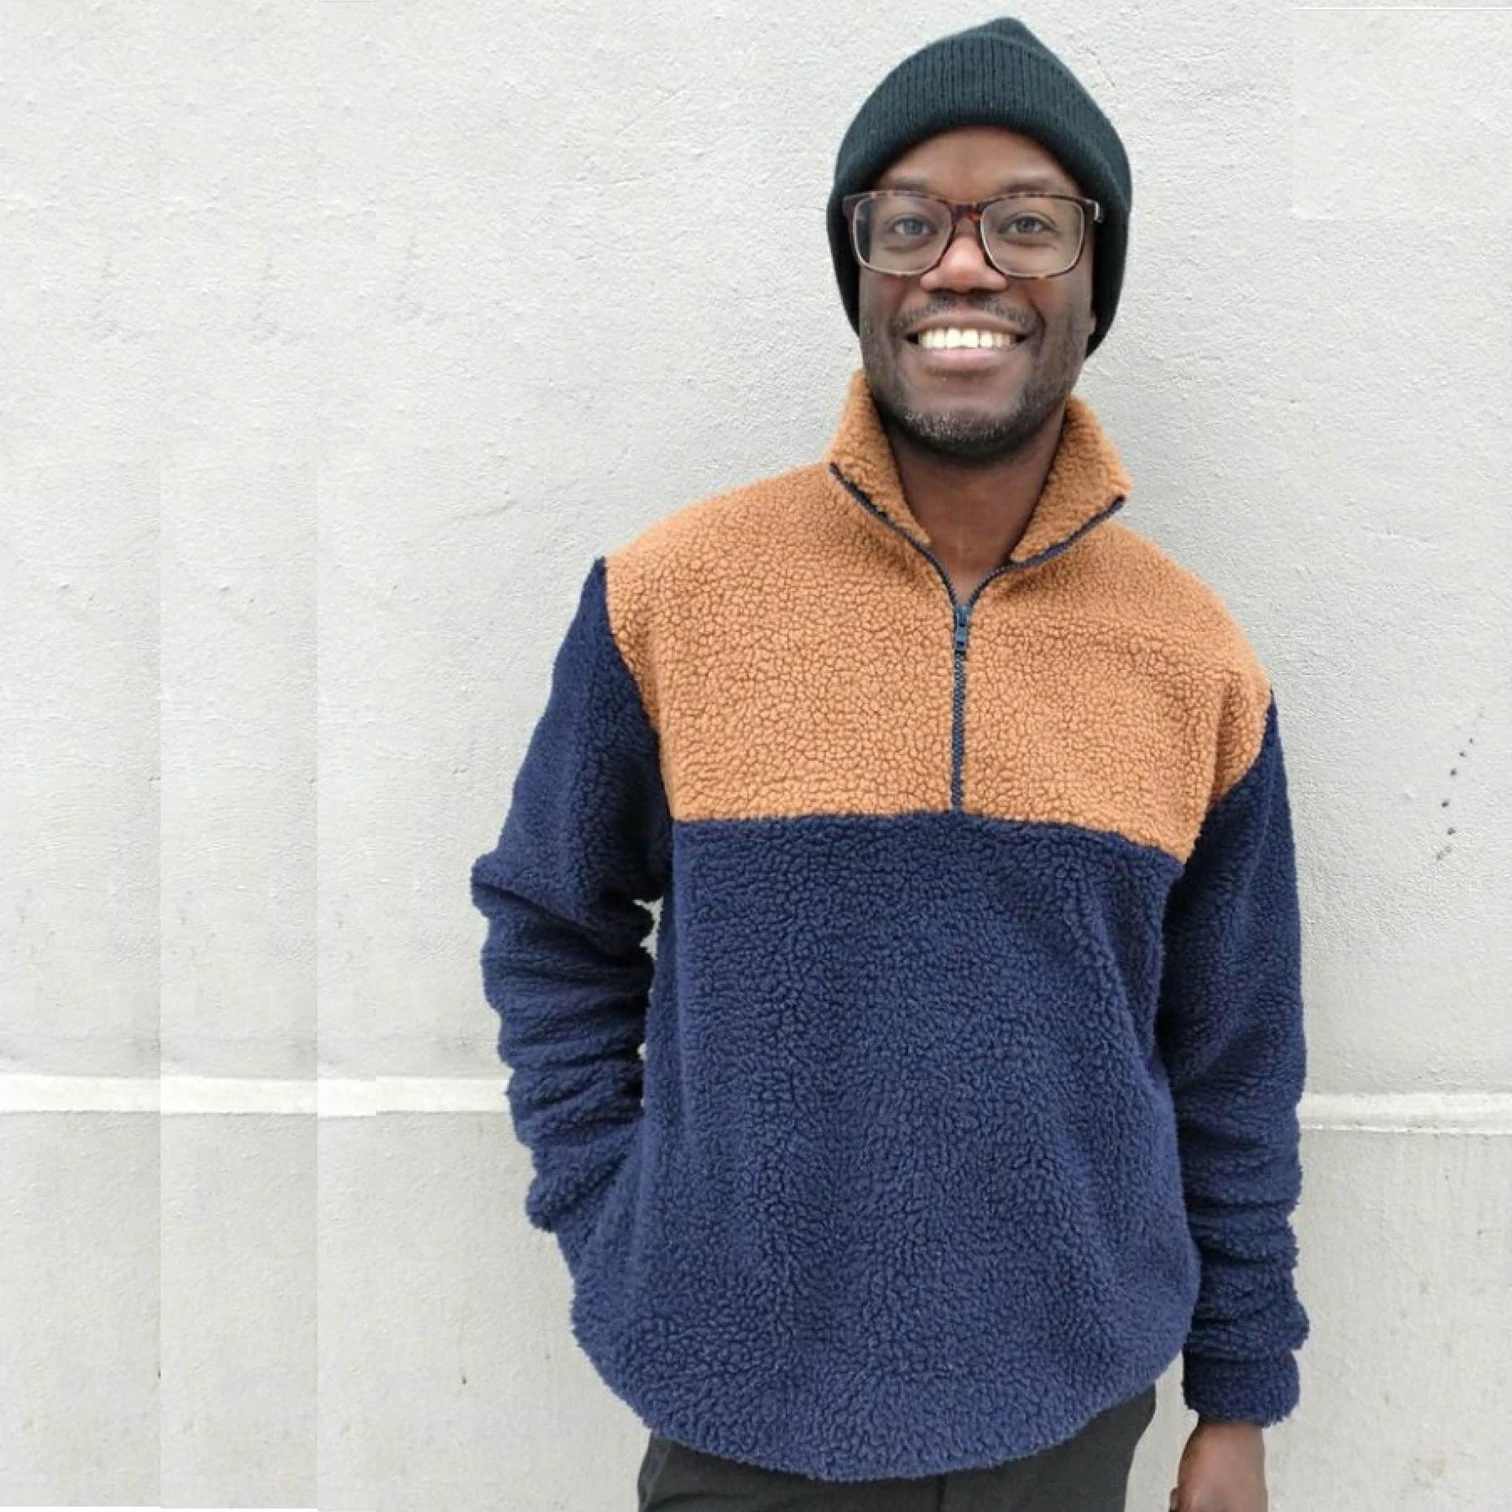 Man wearing the Men's Zip-up Sweater sewing pattern from Wardrobe by Me on The Fold Line. A sweater pattern made in fleece, French terry or fluffy teddy fleece fabrics, featuring a zipper from the neck to the chest, roomy fit, dropped shoulders, side pockets and stand-up collar.